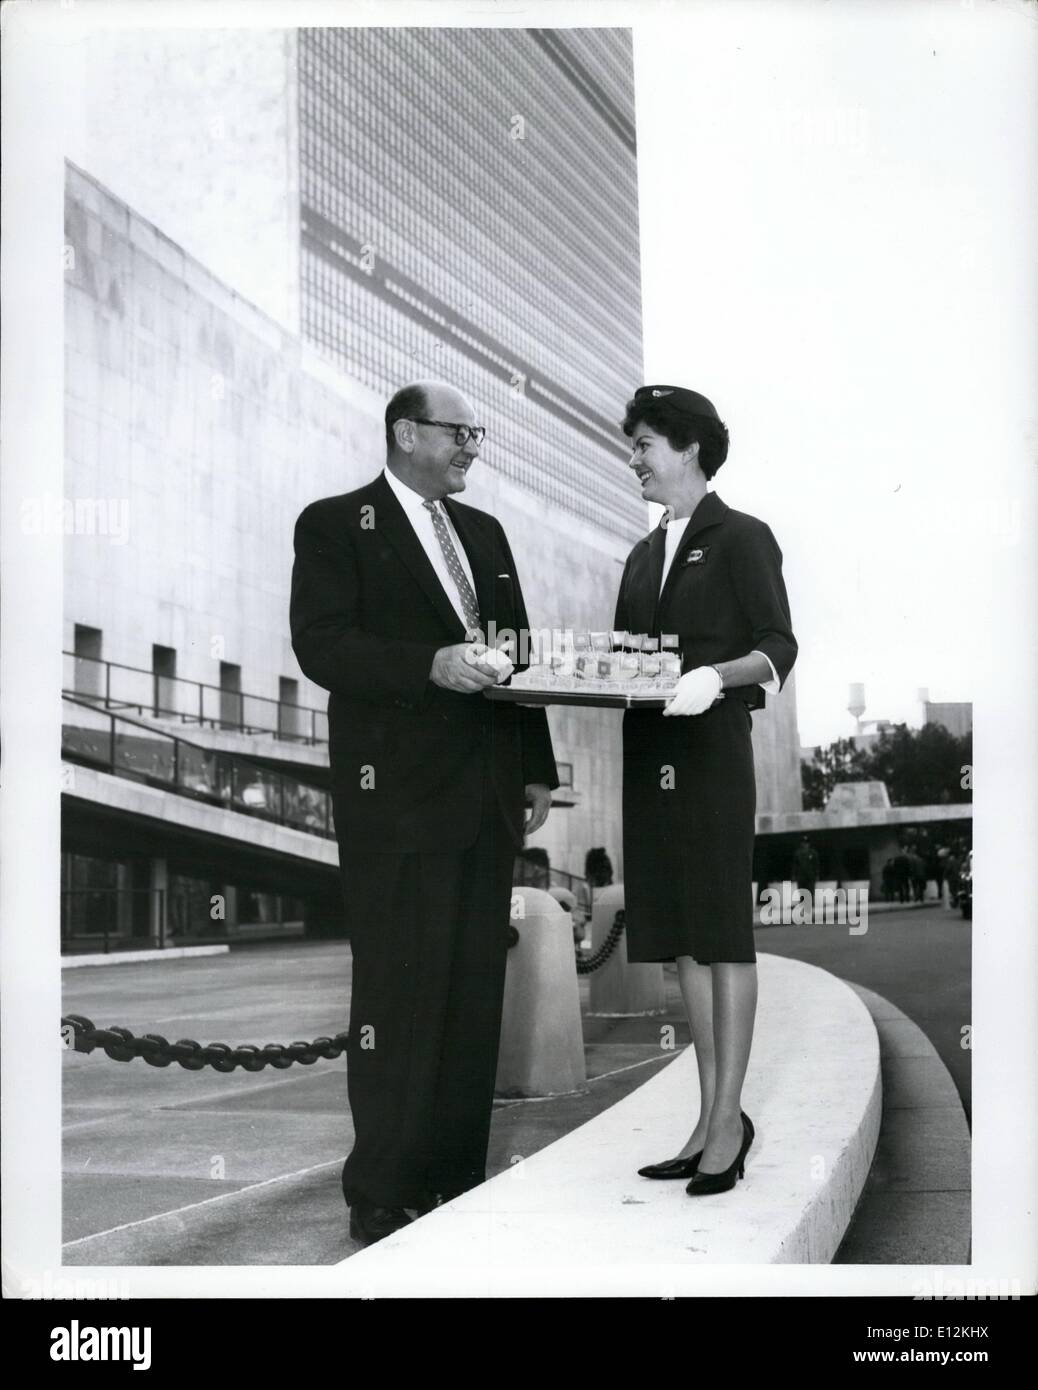 Feb. 24, 2012 - For Release Sunday, Oct. 23, Or Thereafter: U.S. Ambassador James J. Wadsworth accepts a piece United nations''birthday cake'' from Trans World Airlines hostess Ann Lennon outside U.N. headquarters in New York. Similar pieces of pastry, frosted in white with blue''U.N.'' initials and decorated with miniature U.N. flags, will be served to passengers on TWA flights Oct. 24, in observance of United Nations Day. miss Lennon is from New Hyde Park, Long island. Stock Photo